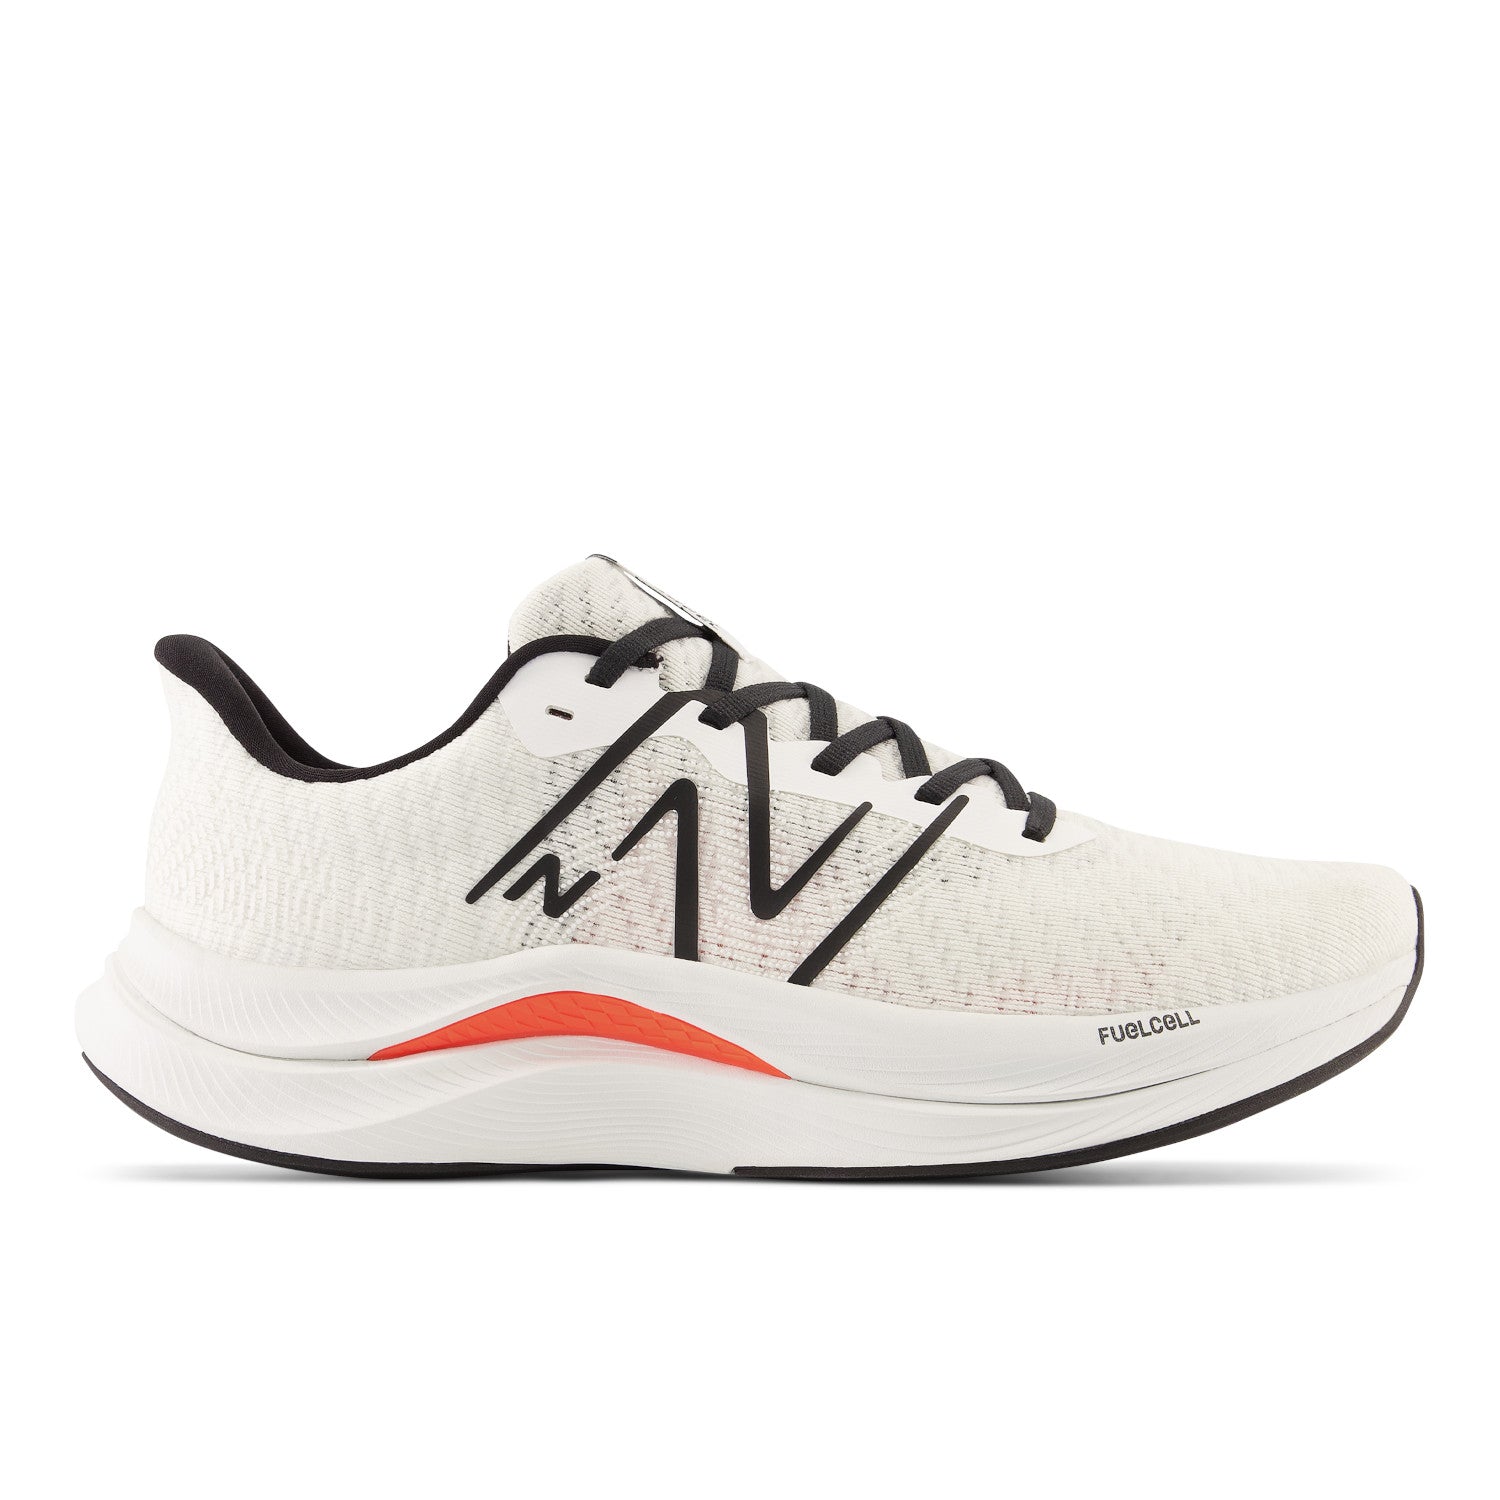 Men's New Balance FuelCell Propel v4 Color: White with Black